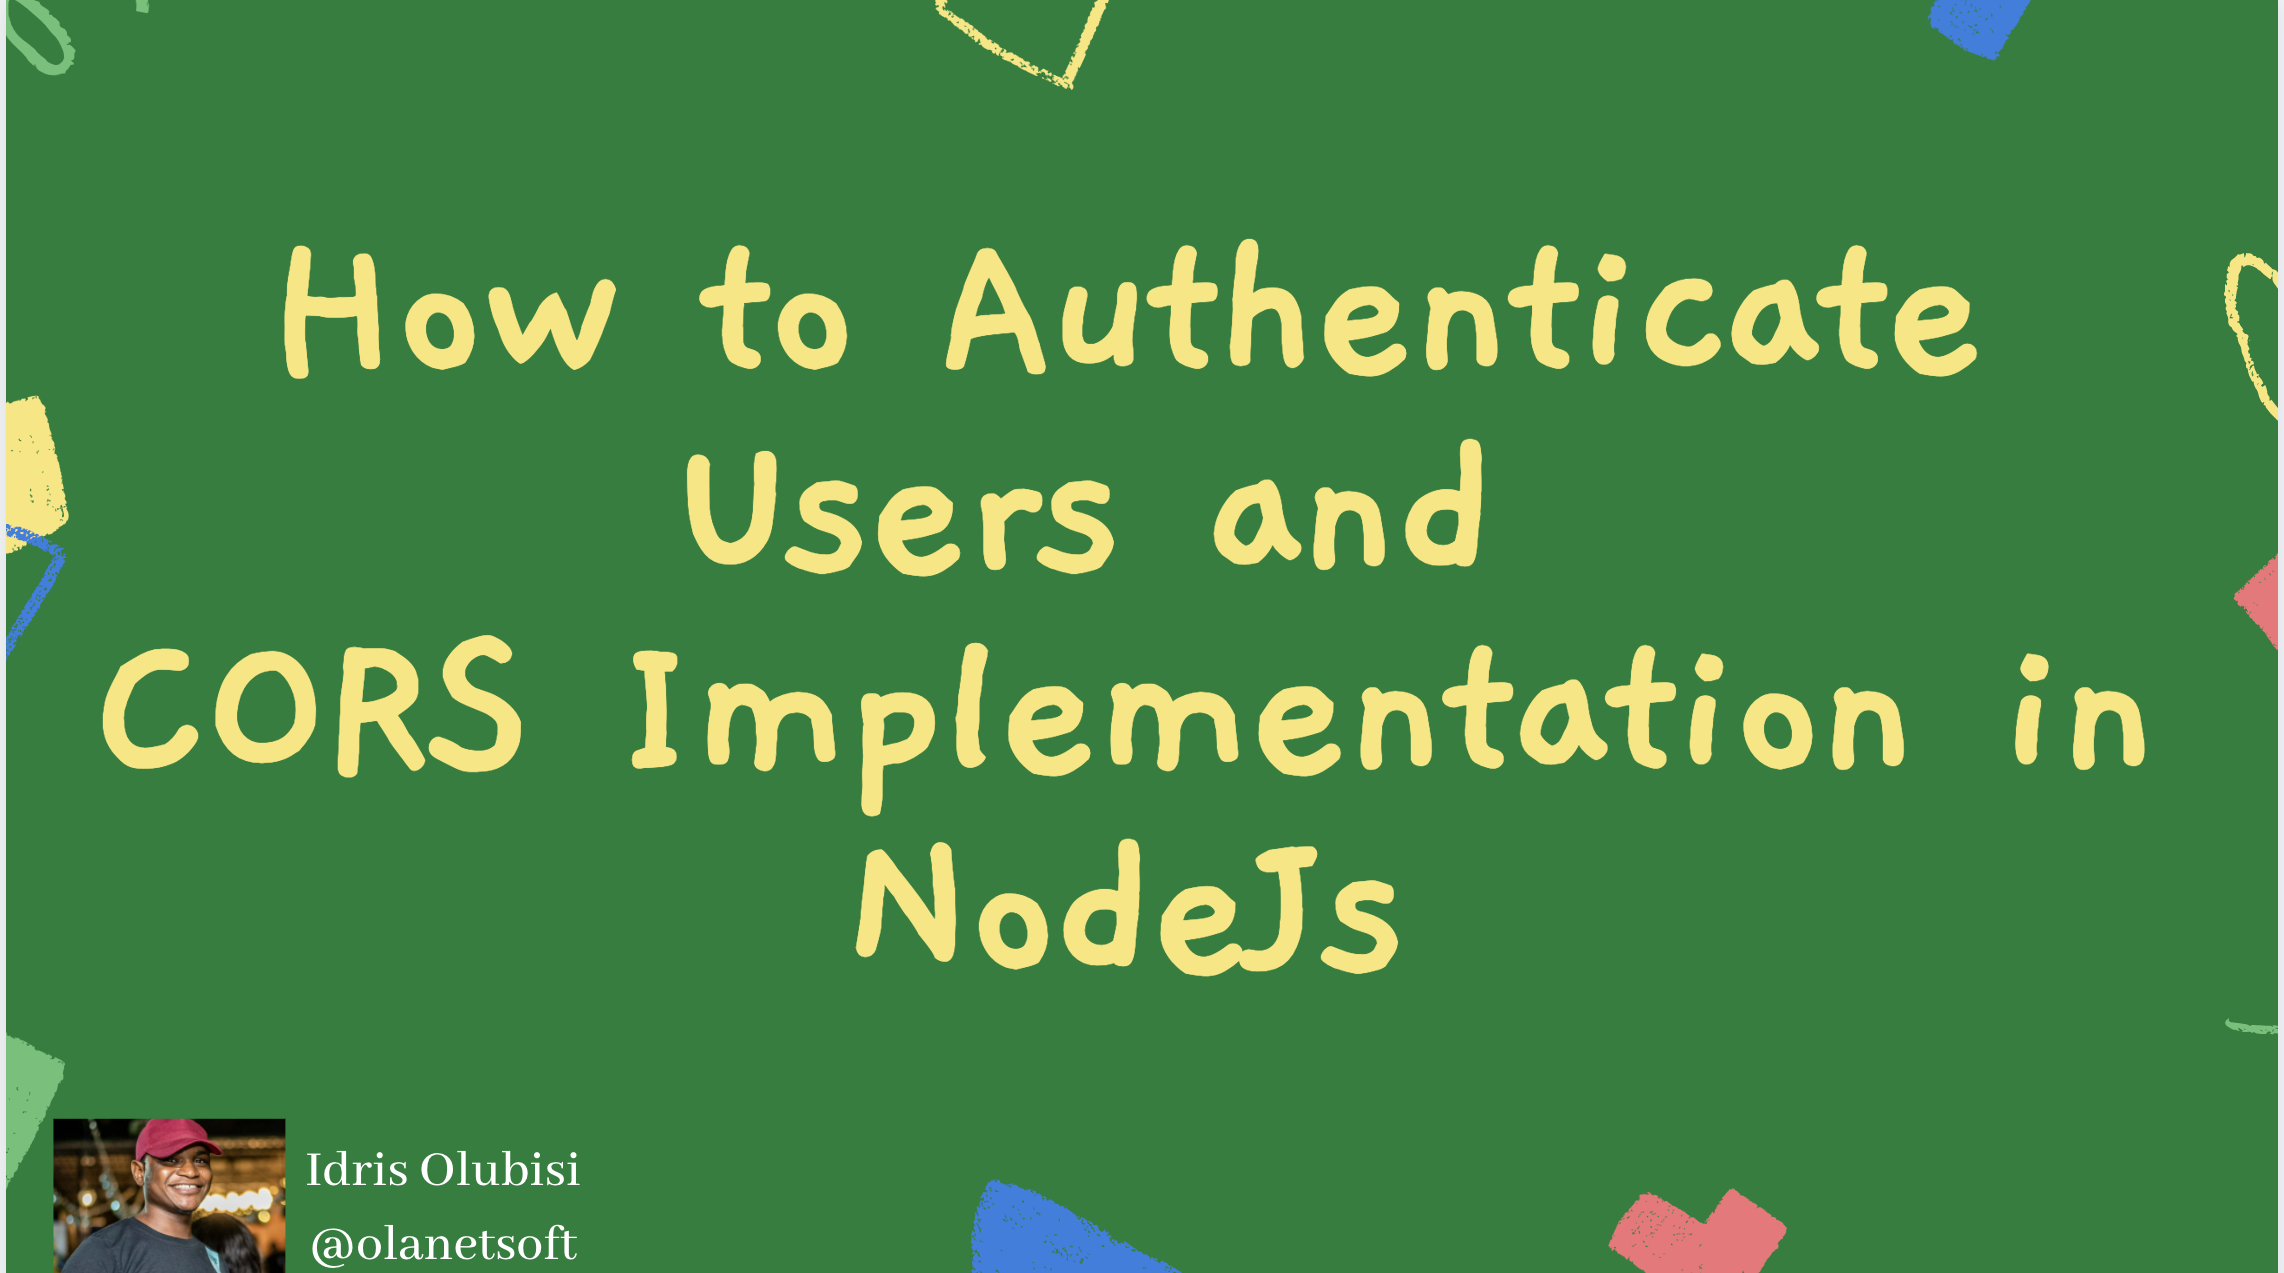 How to Authenticate Users and Implement CORS in Node.js Apps